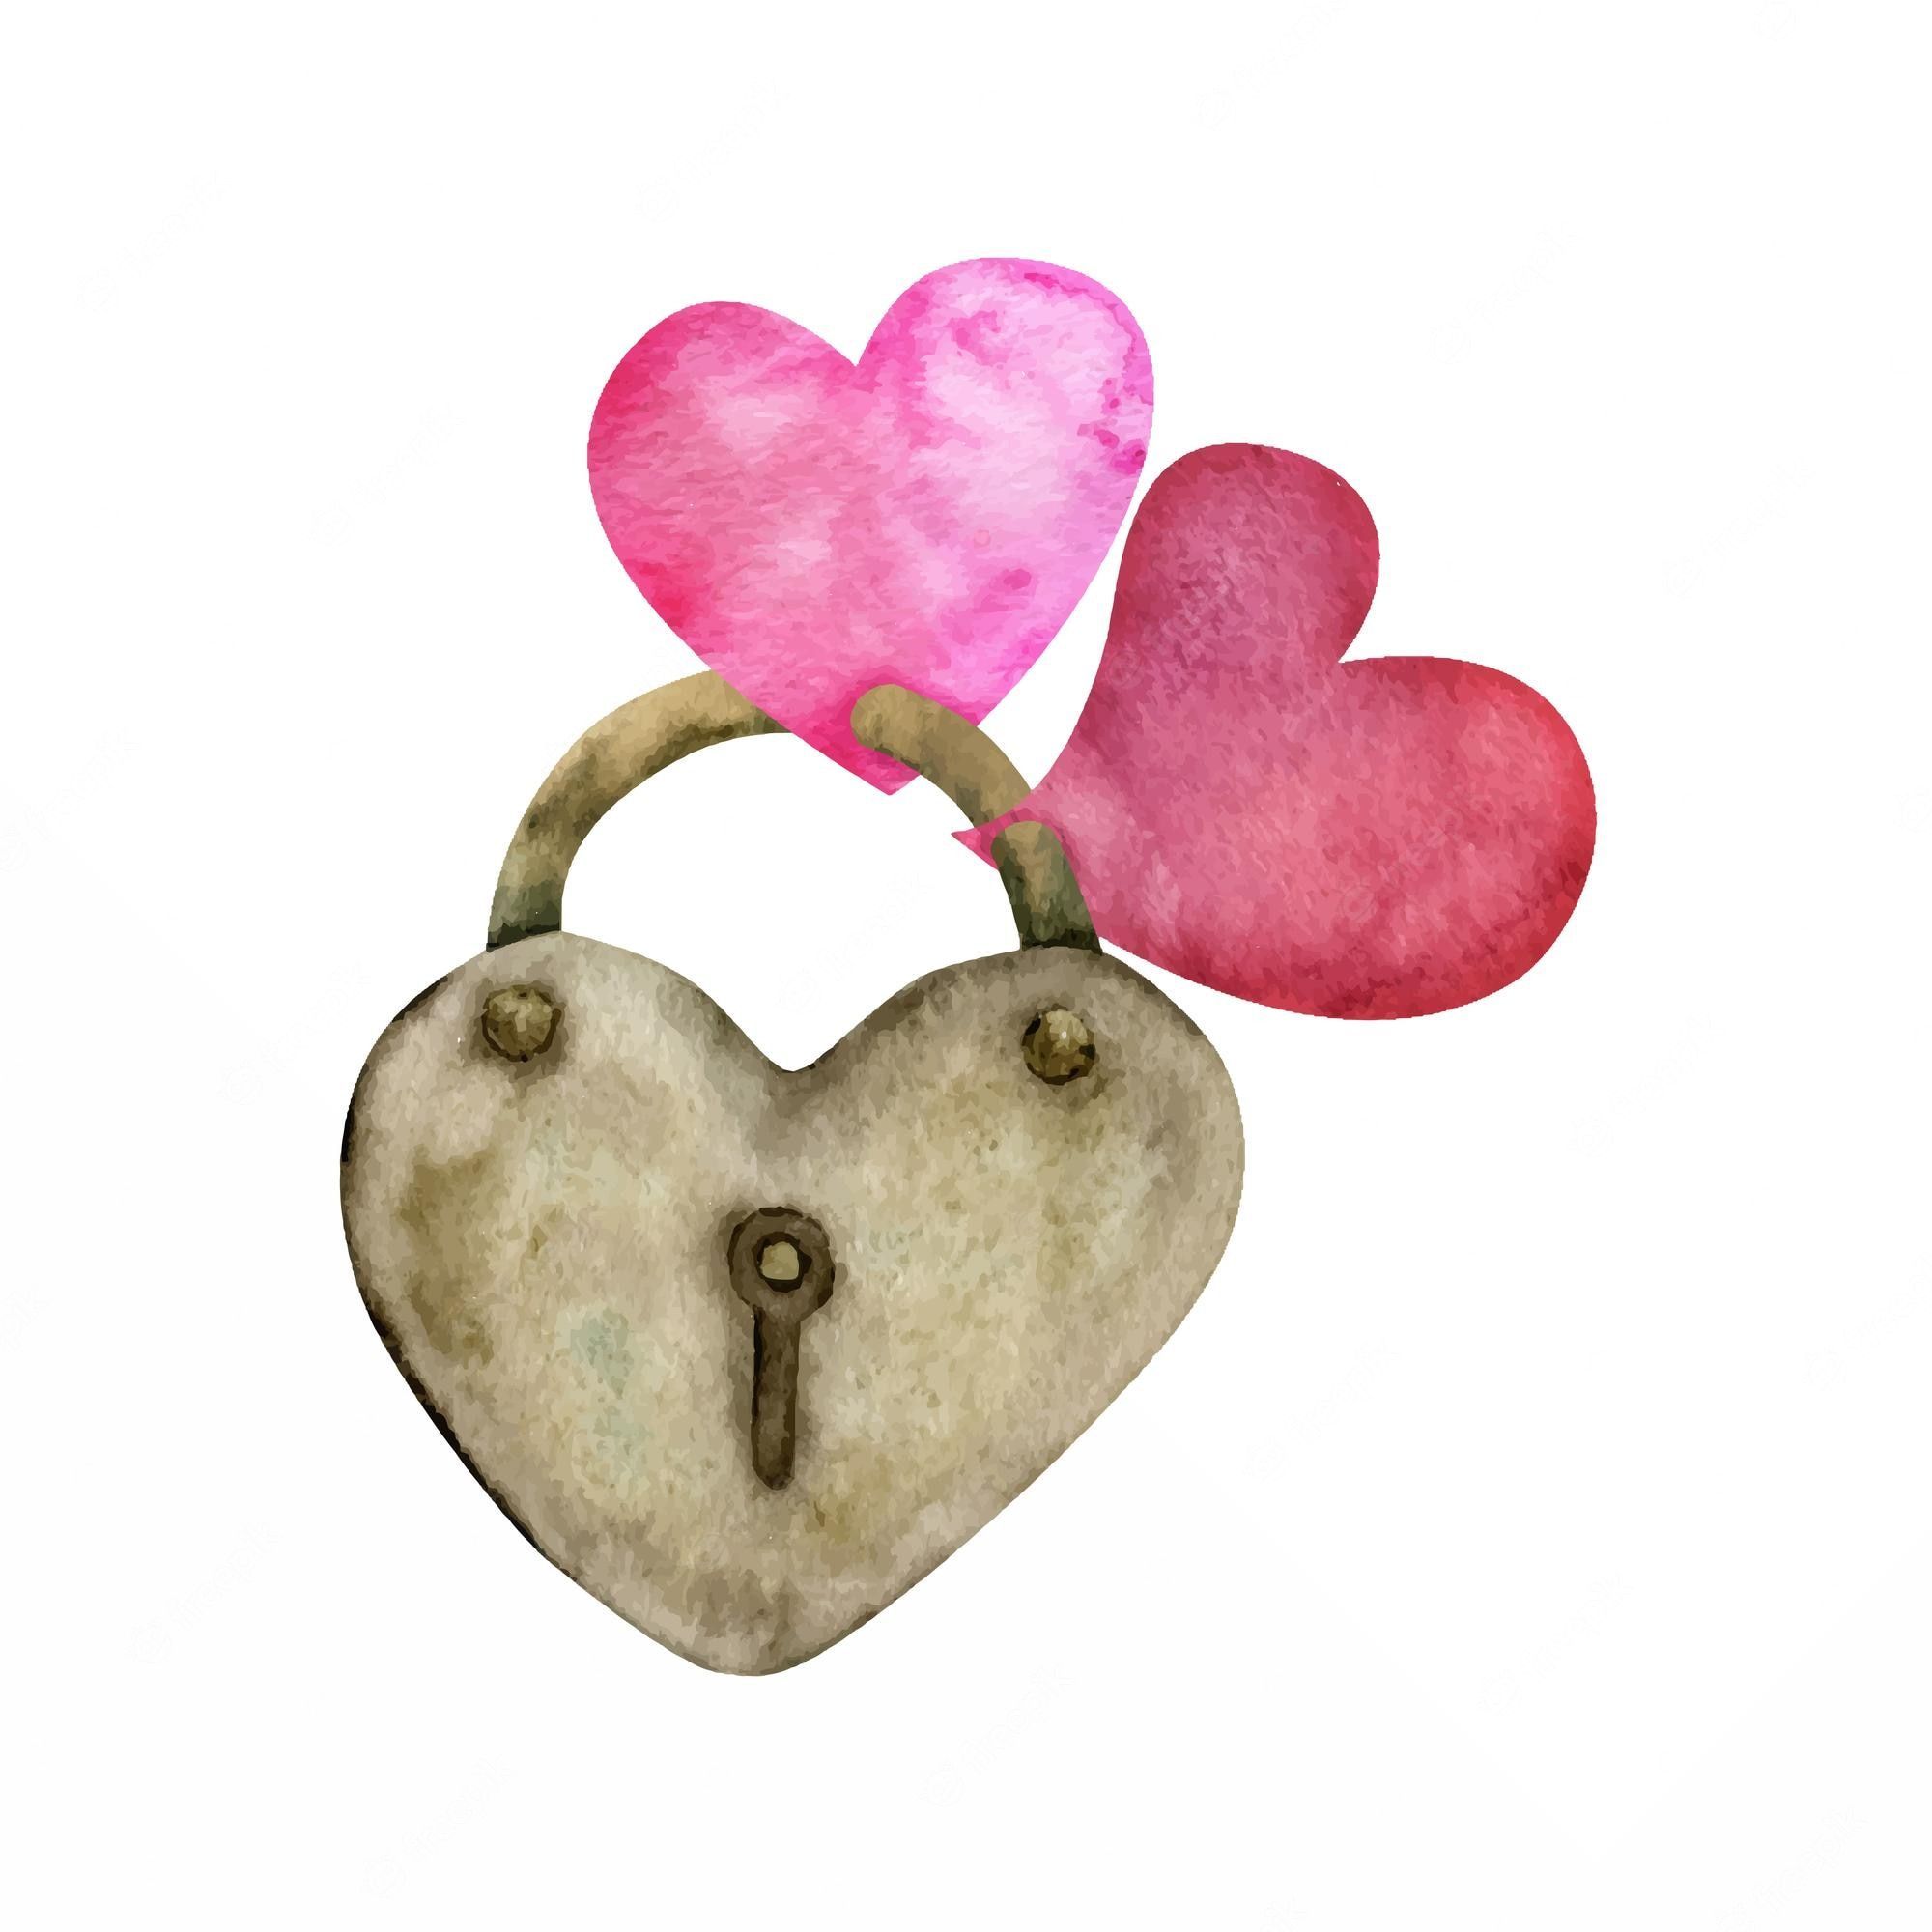 A watercolor painting of two hearts and keys - Lovecore